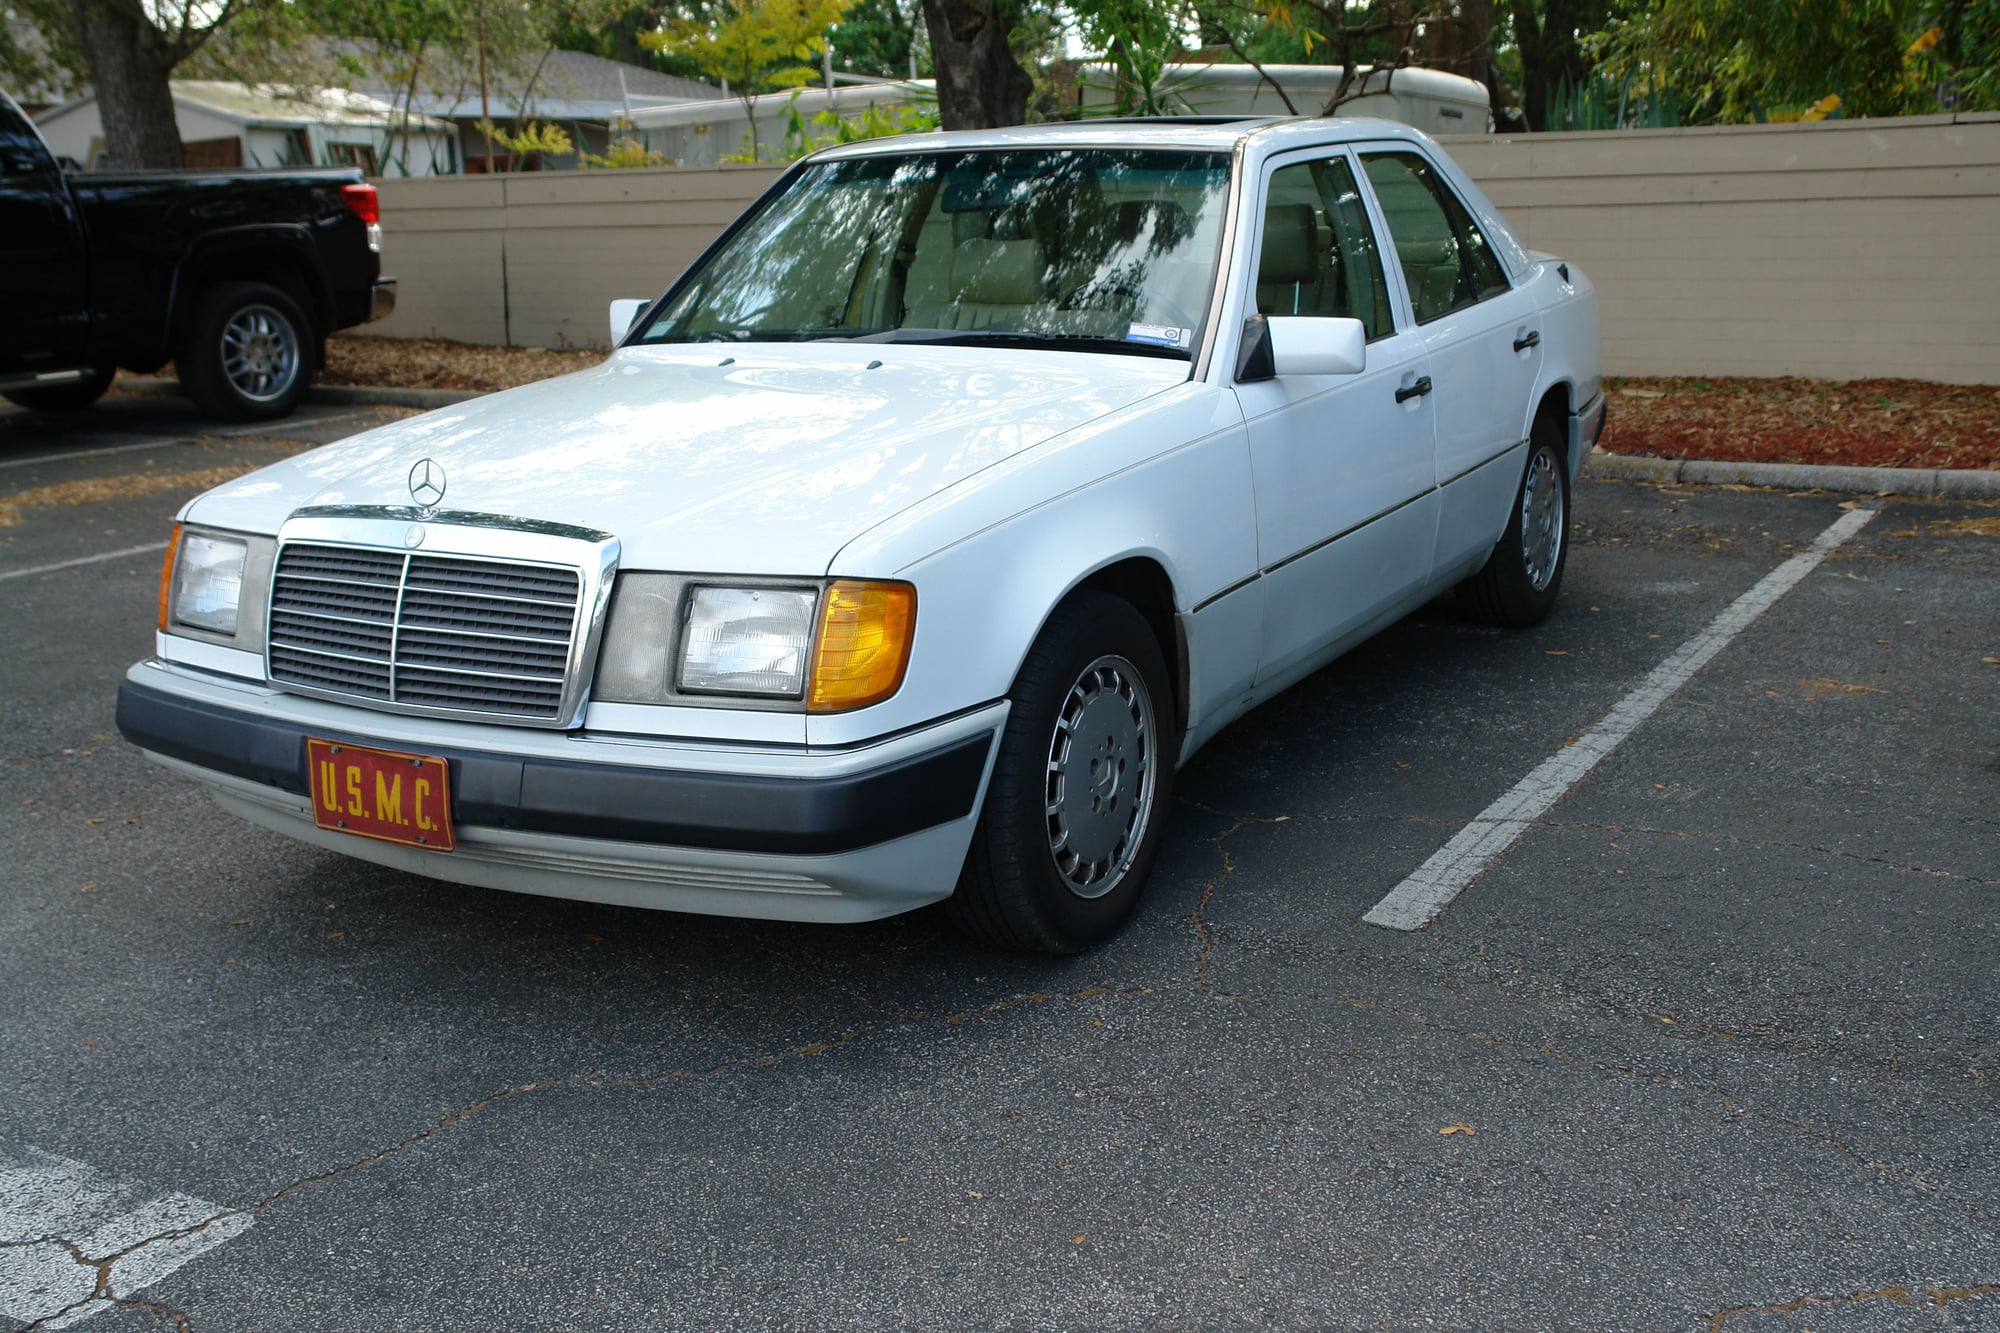 1991 Mercedes-Benz 300D - 91 Mercedes 300D Low Miles No Reserve eBay Auction - Used - VIN WDBEB28D5MB411065 - 168,544 Miles - 5 cyl - 2WD - Automatic - Sedan - White - St Petersburg, FL 33701, United States